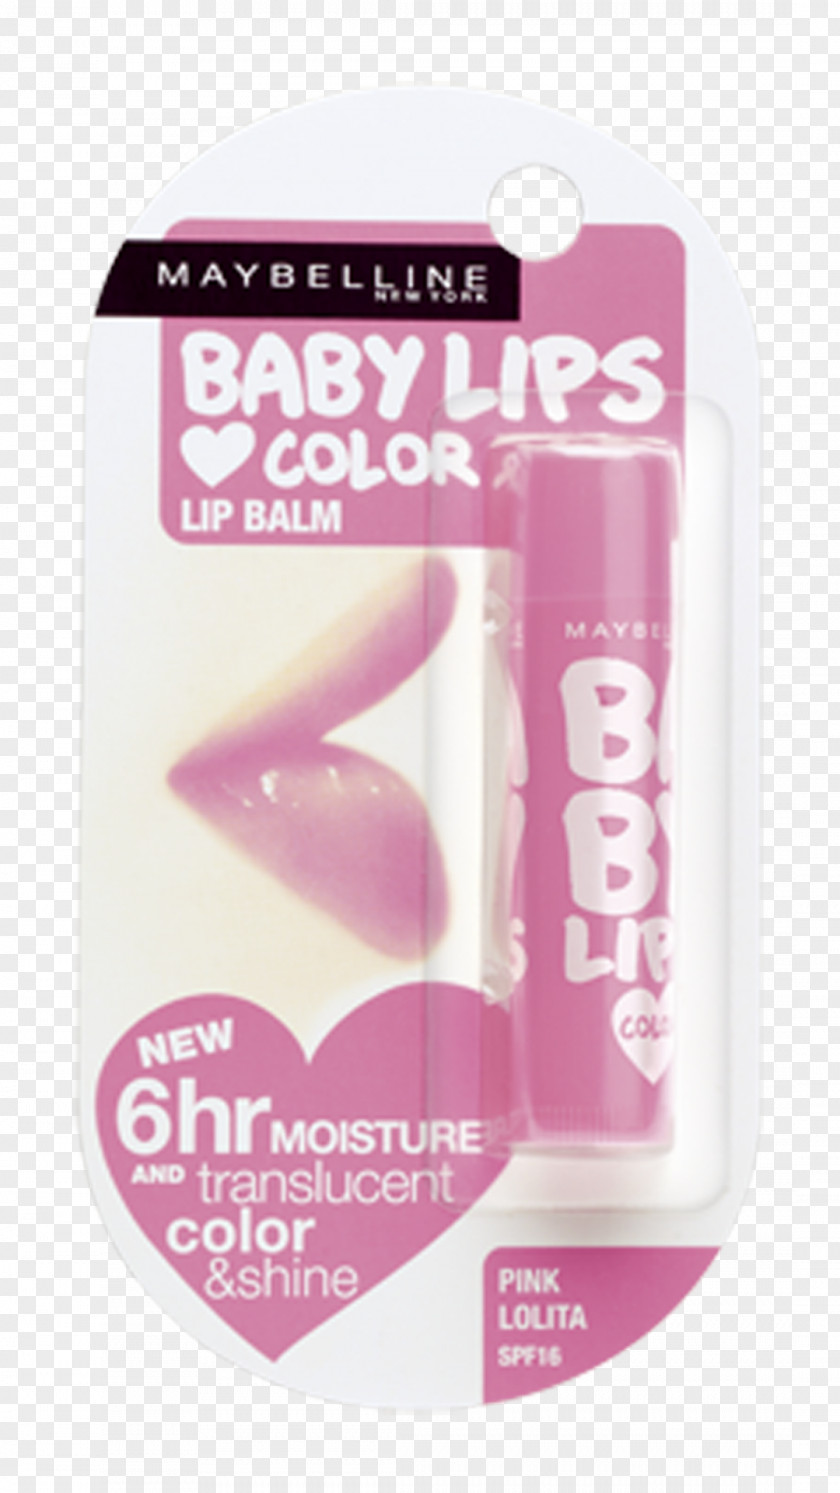 Female Skin Care Products Lip Balm Color Maybelline Pink PNG